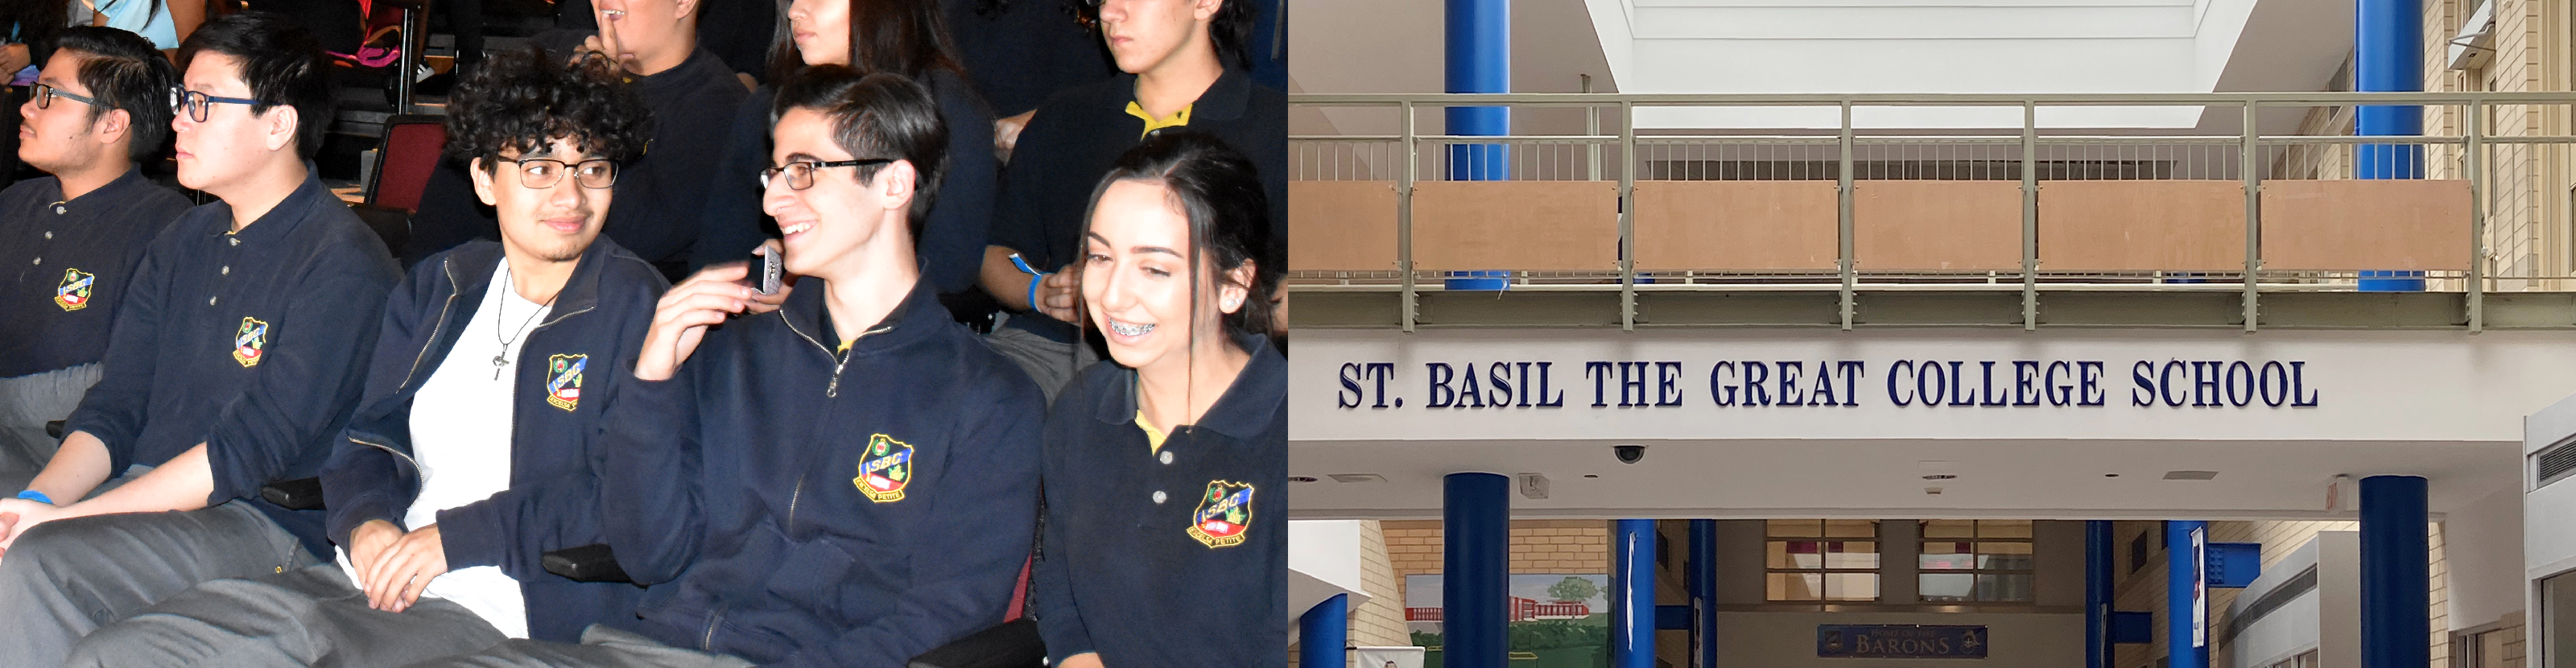 Left, a group of St-Basil-the-Great students in school uniform at an assembly. Right, photo of the front foyer of the St. Basil-the-Great Catholic School building.